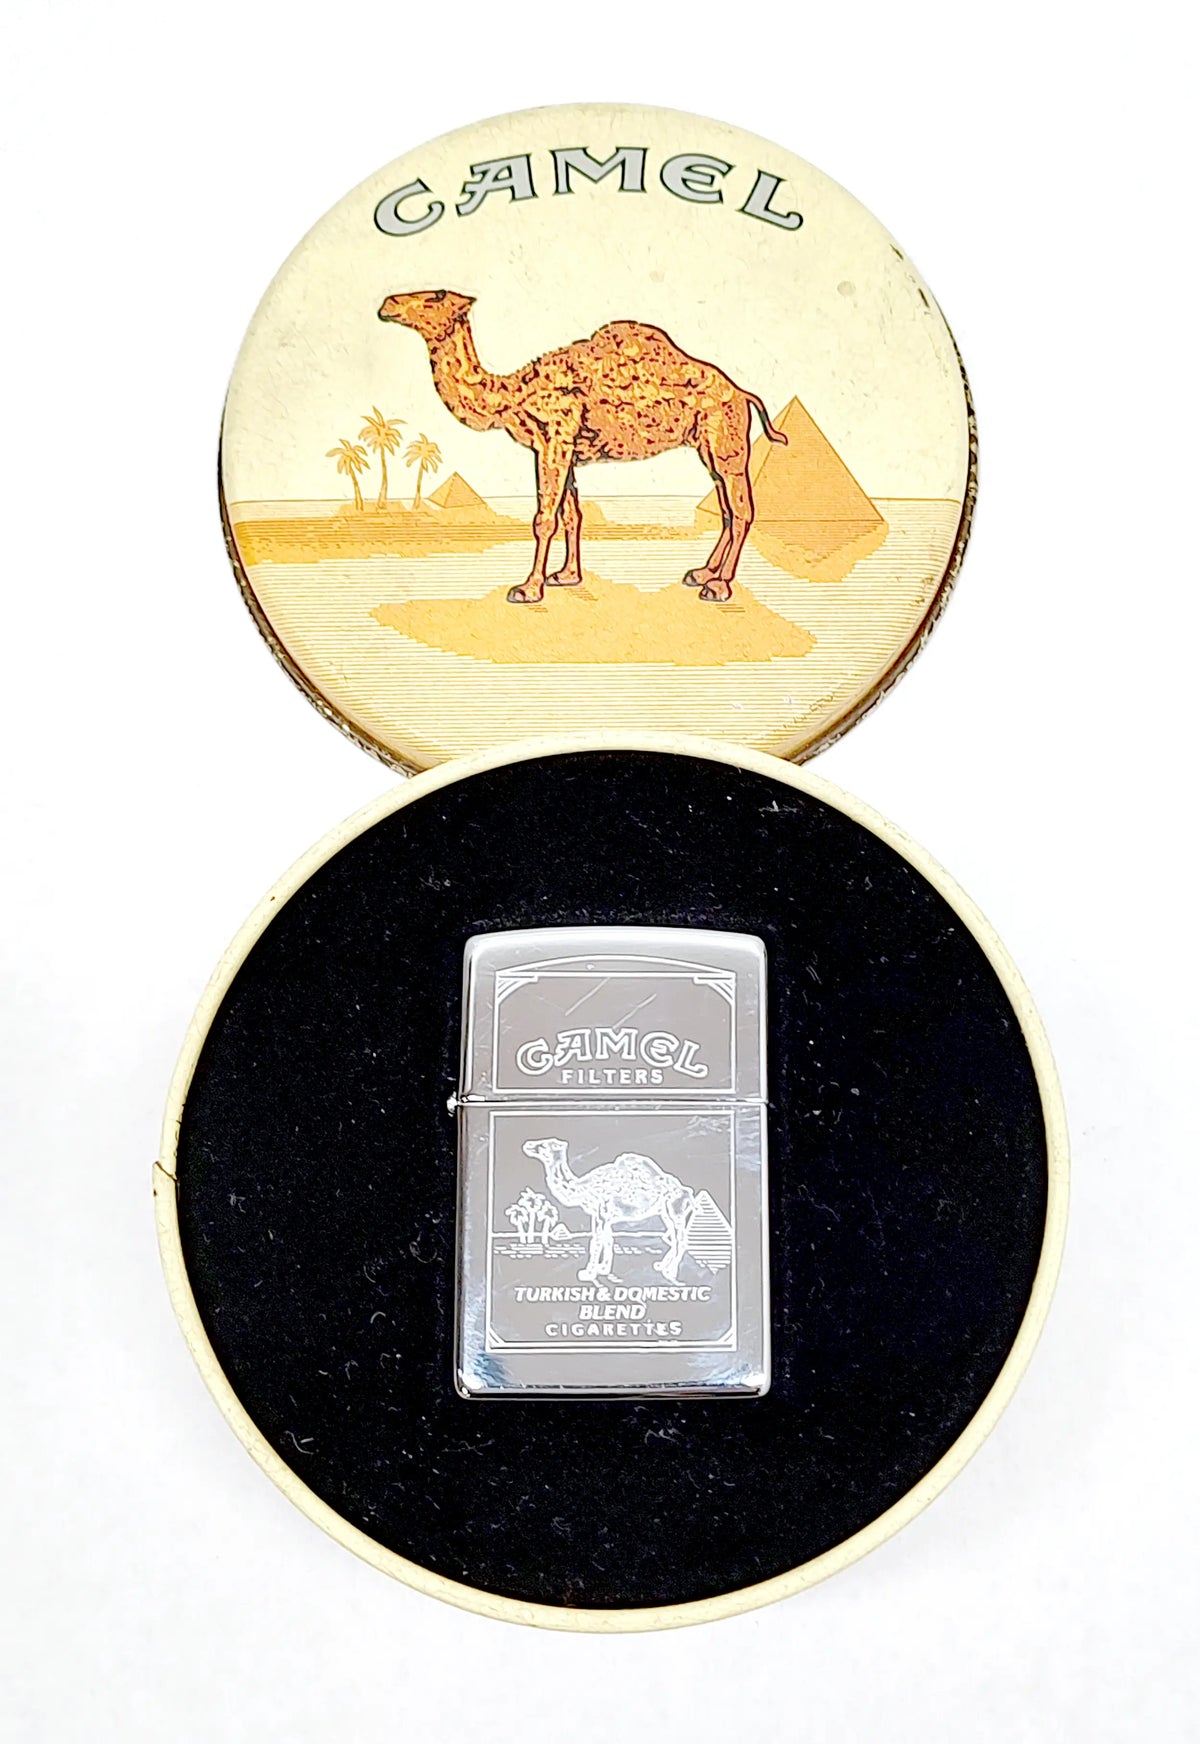 New XI 1995 Camel Filters Turkish Blend High Polished Chrome Zippo Lighter - Hers and His Treasures